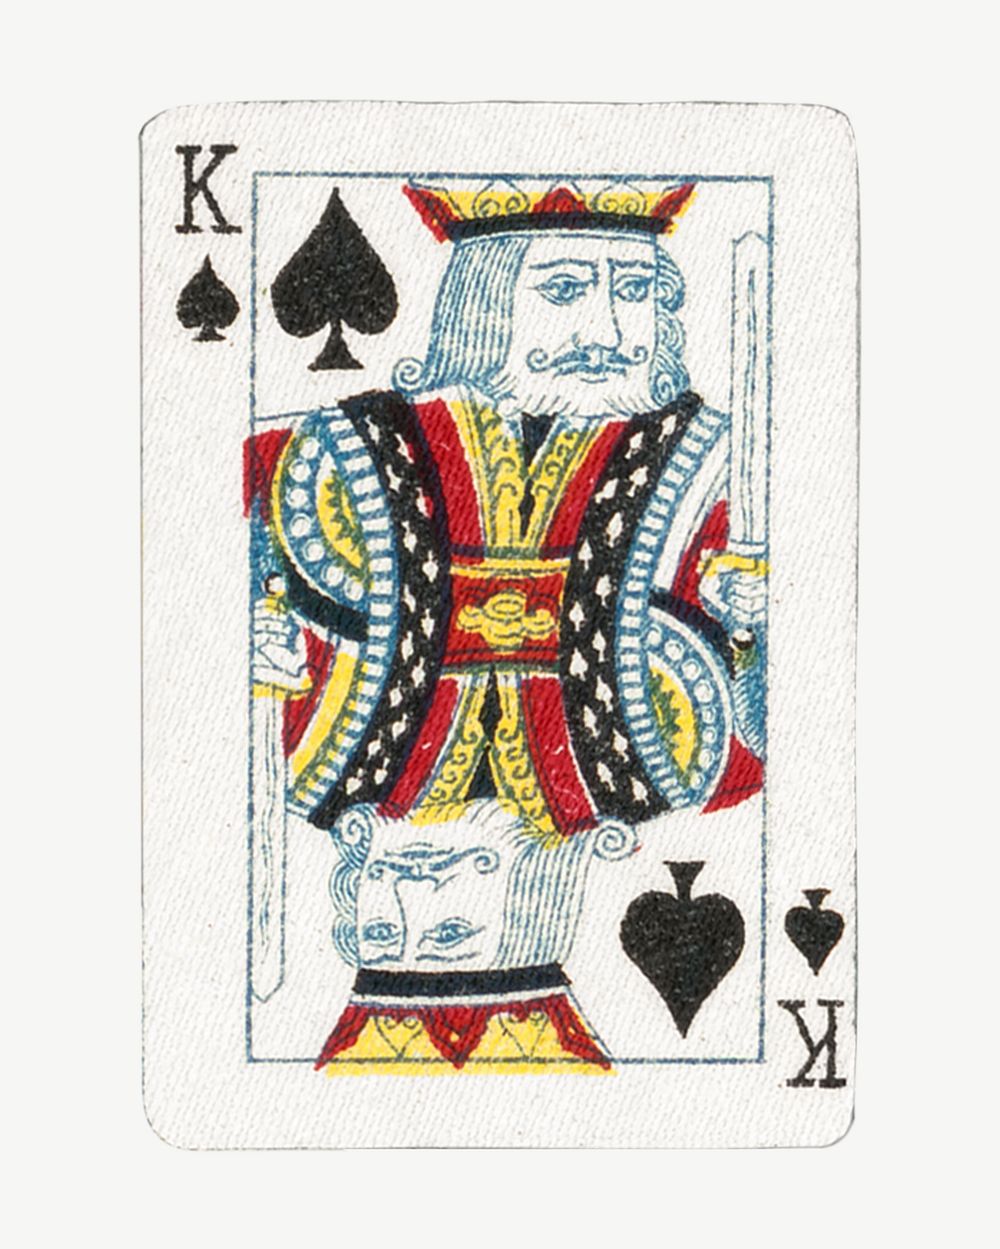 King spade poker card collage element psd. Remixed by rawpixel.